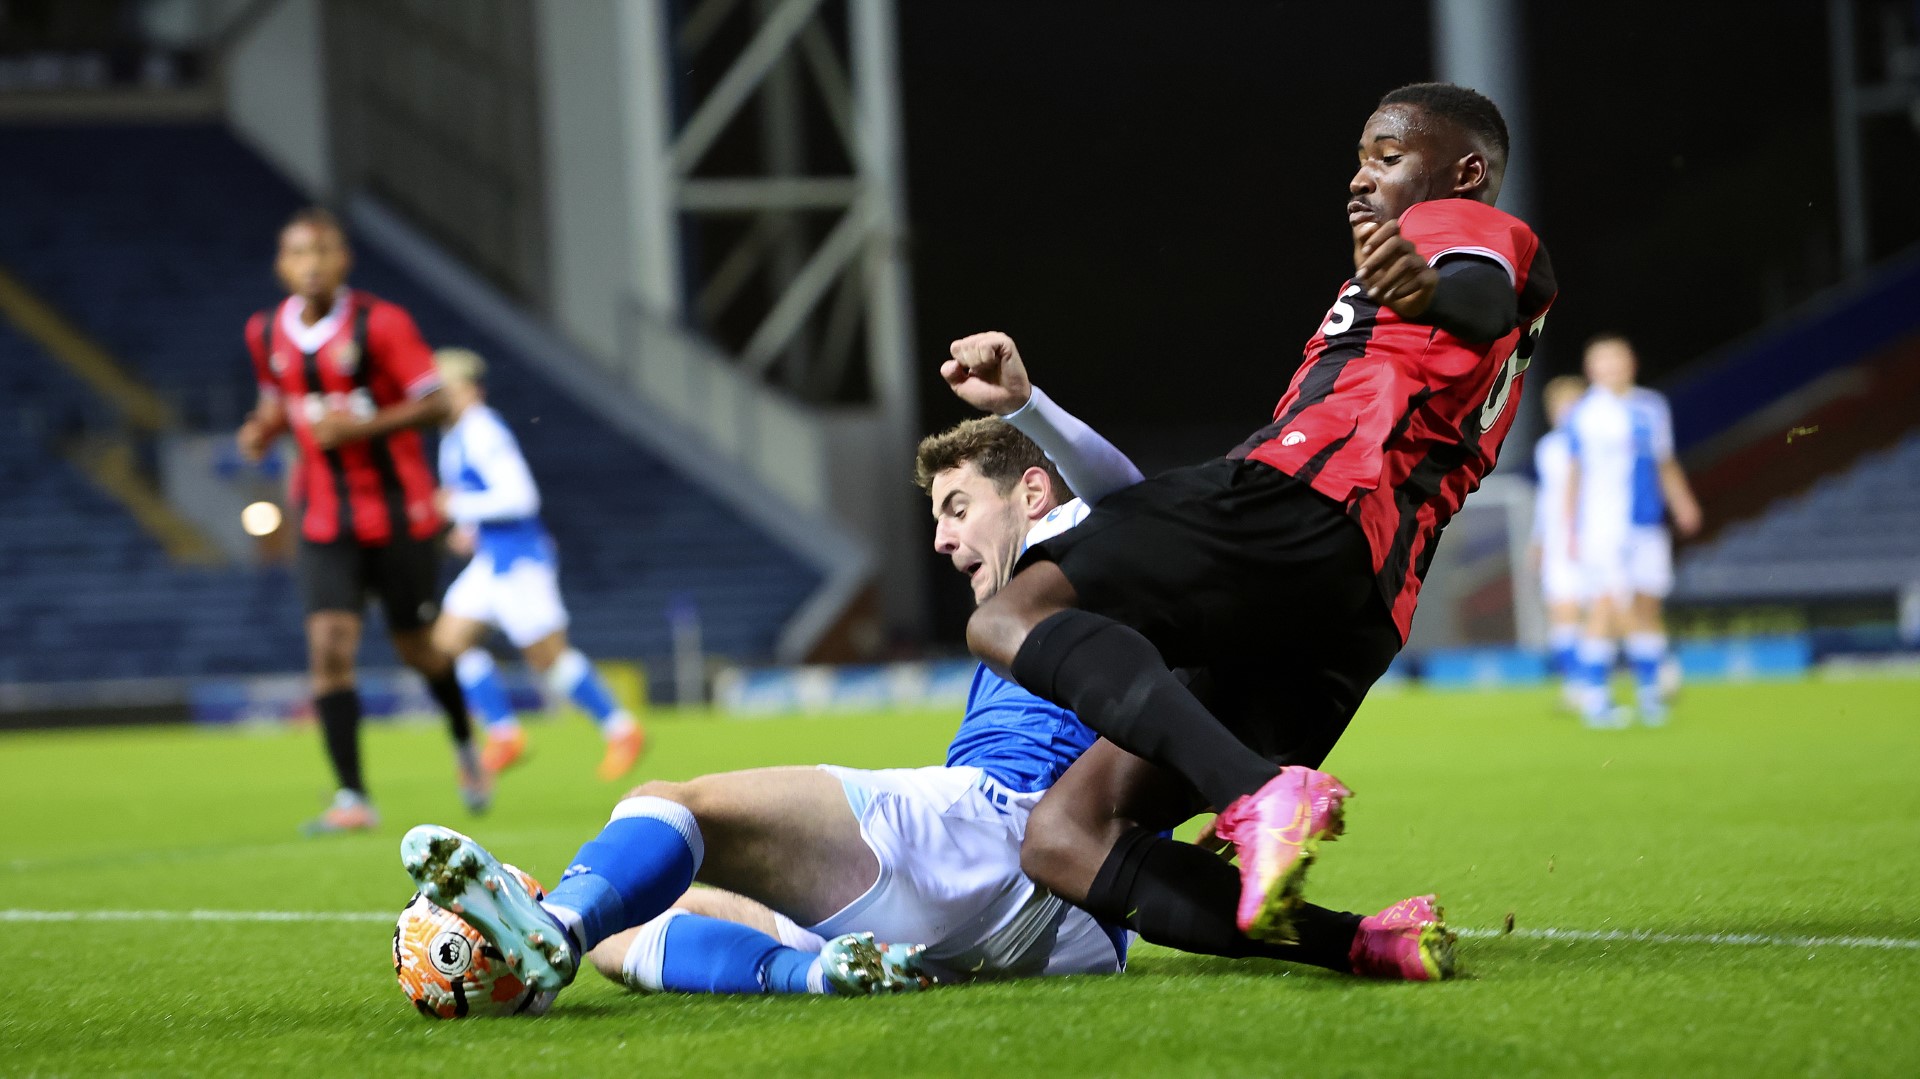 Blackburn Rovers bolster qualification chances with Nice win